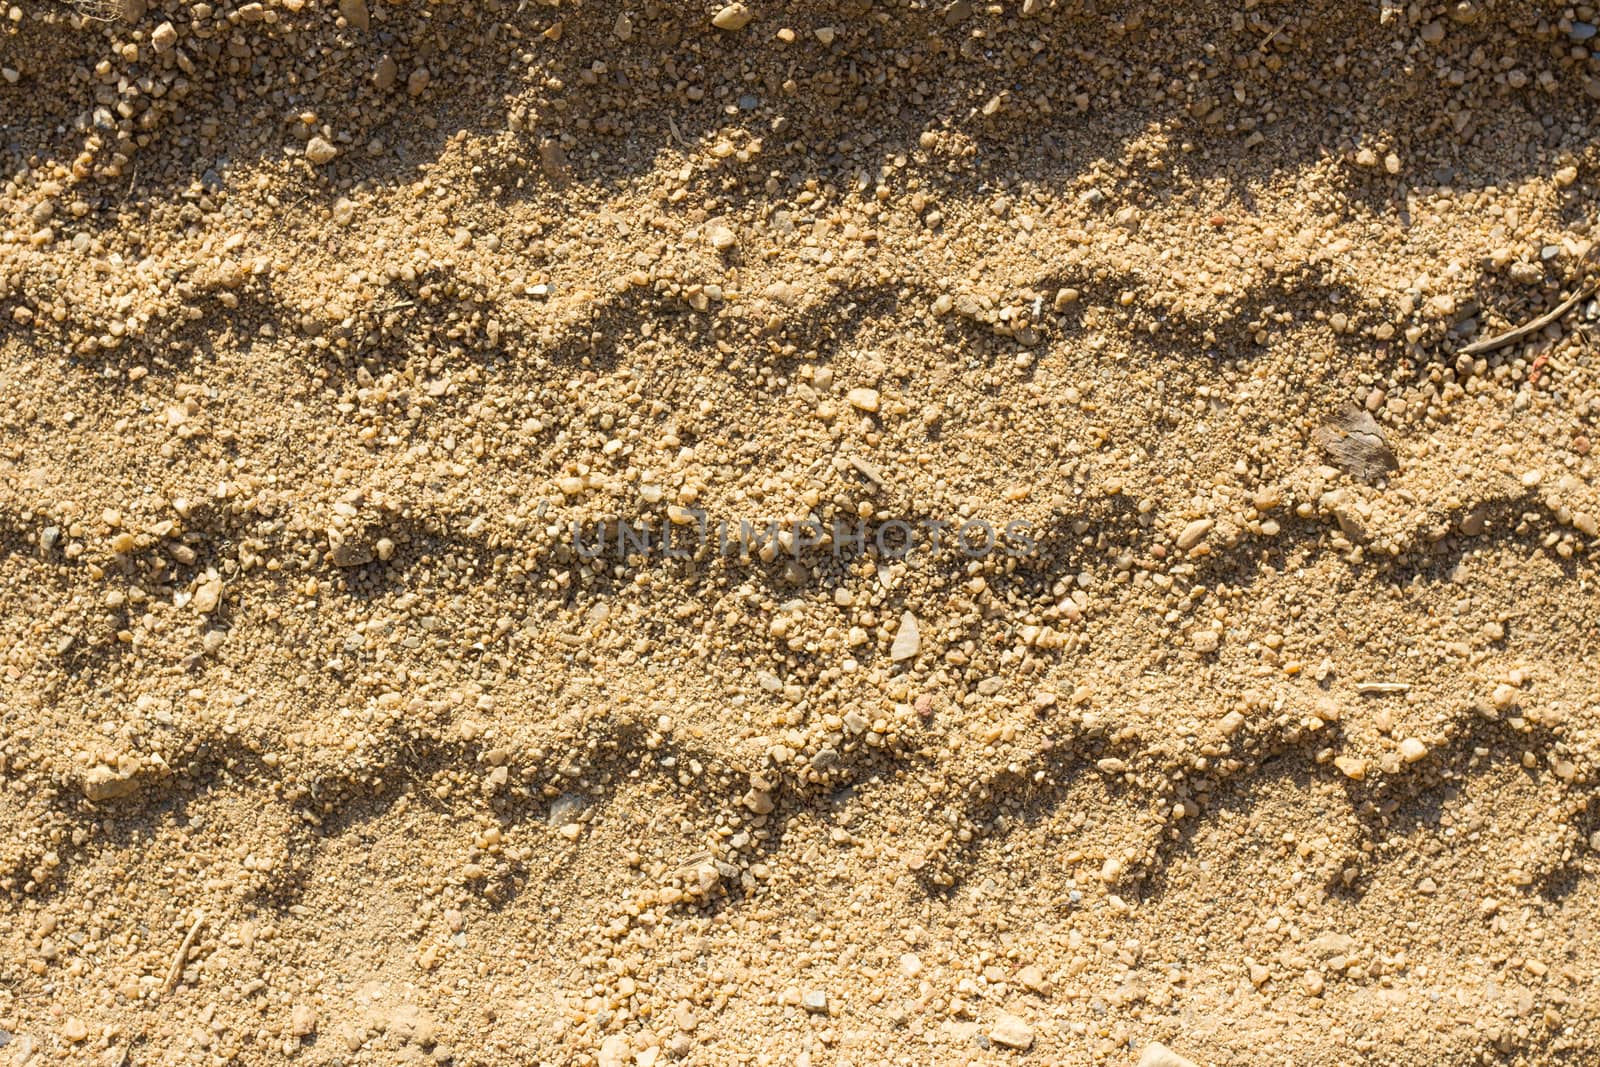 Car tire tracks on sand, as background